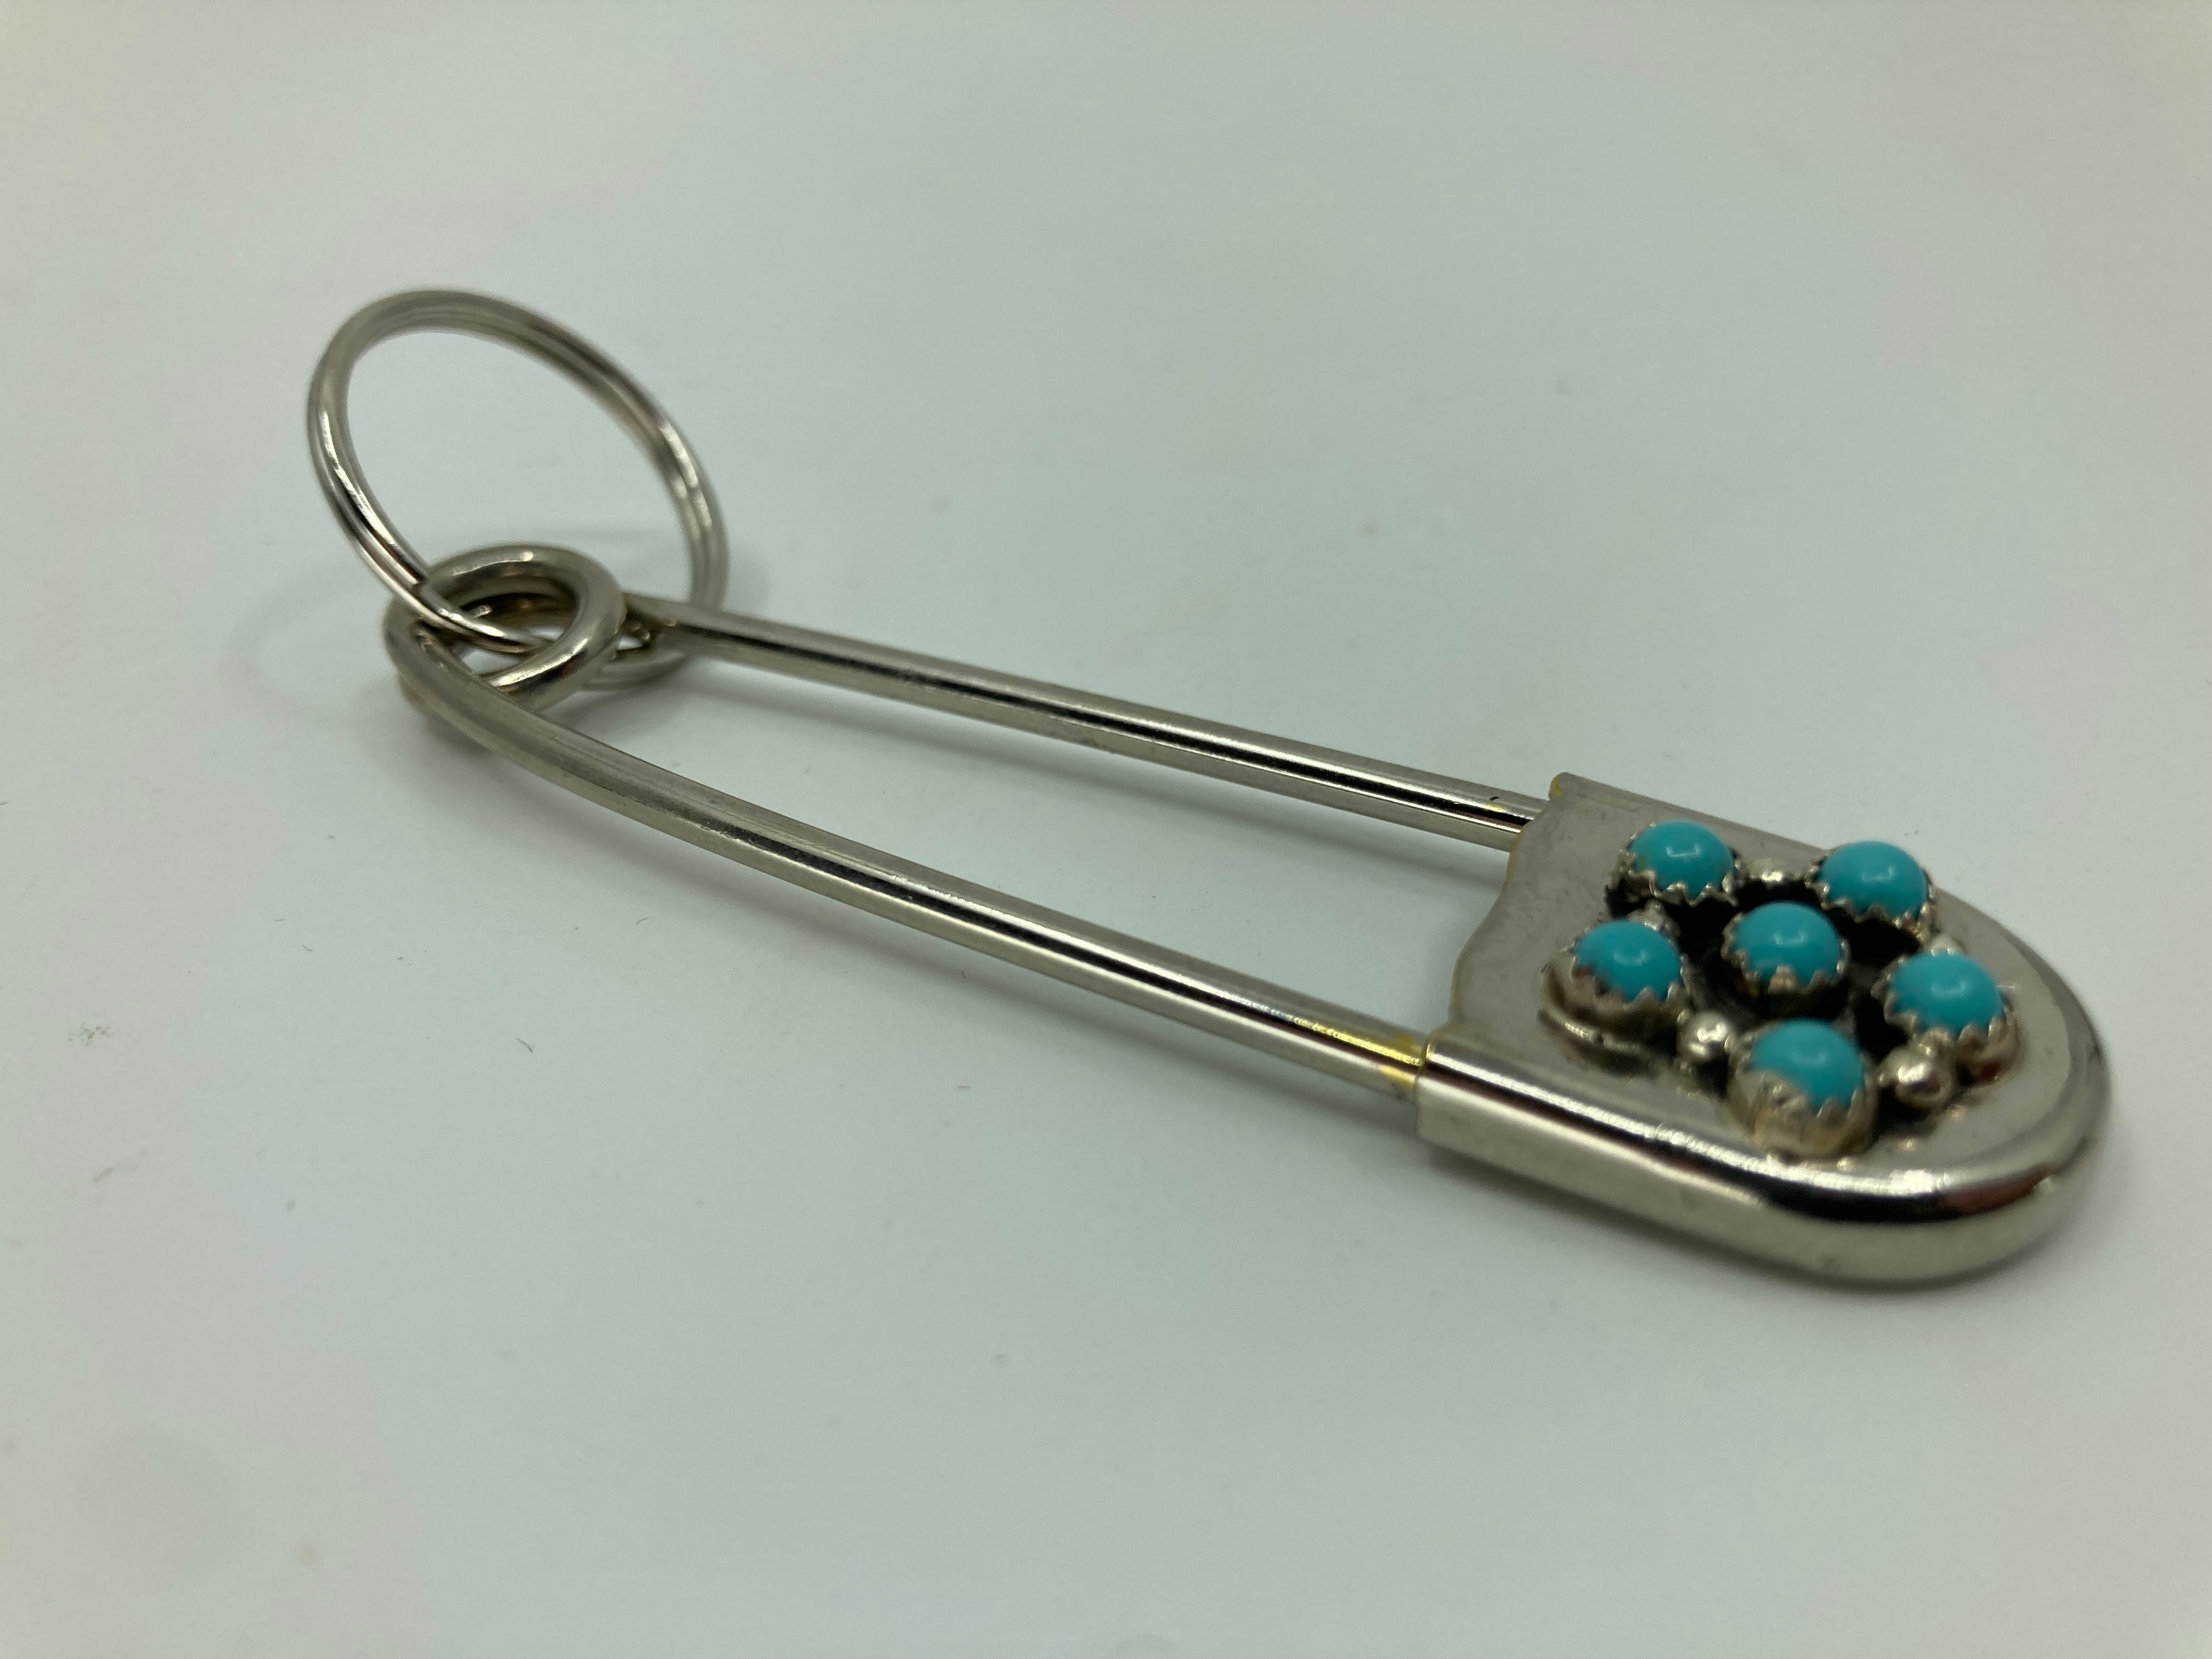 Handmade Sterling Silver and Turquoise Key Ring PSTPKR01